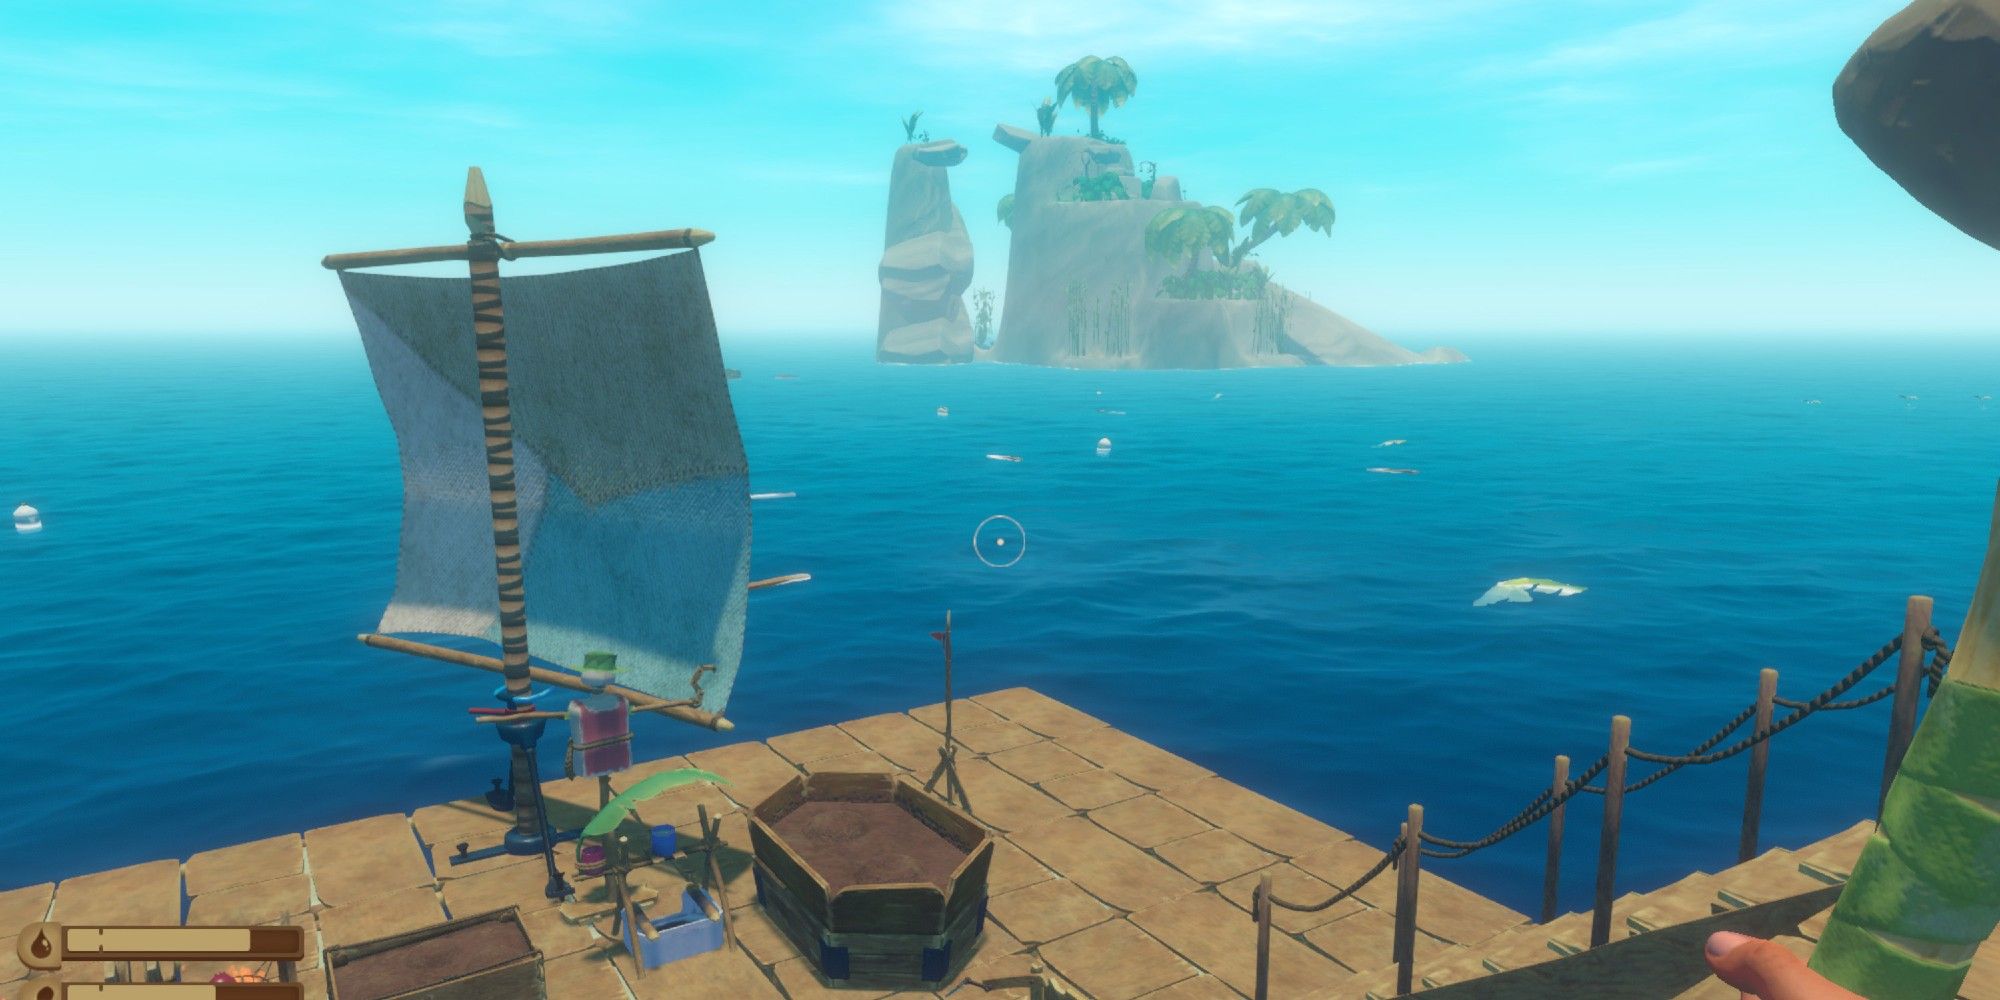 Players can build creative and intricate vessels in Raft